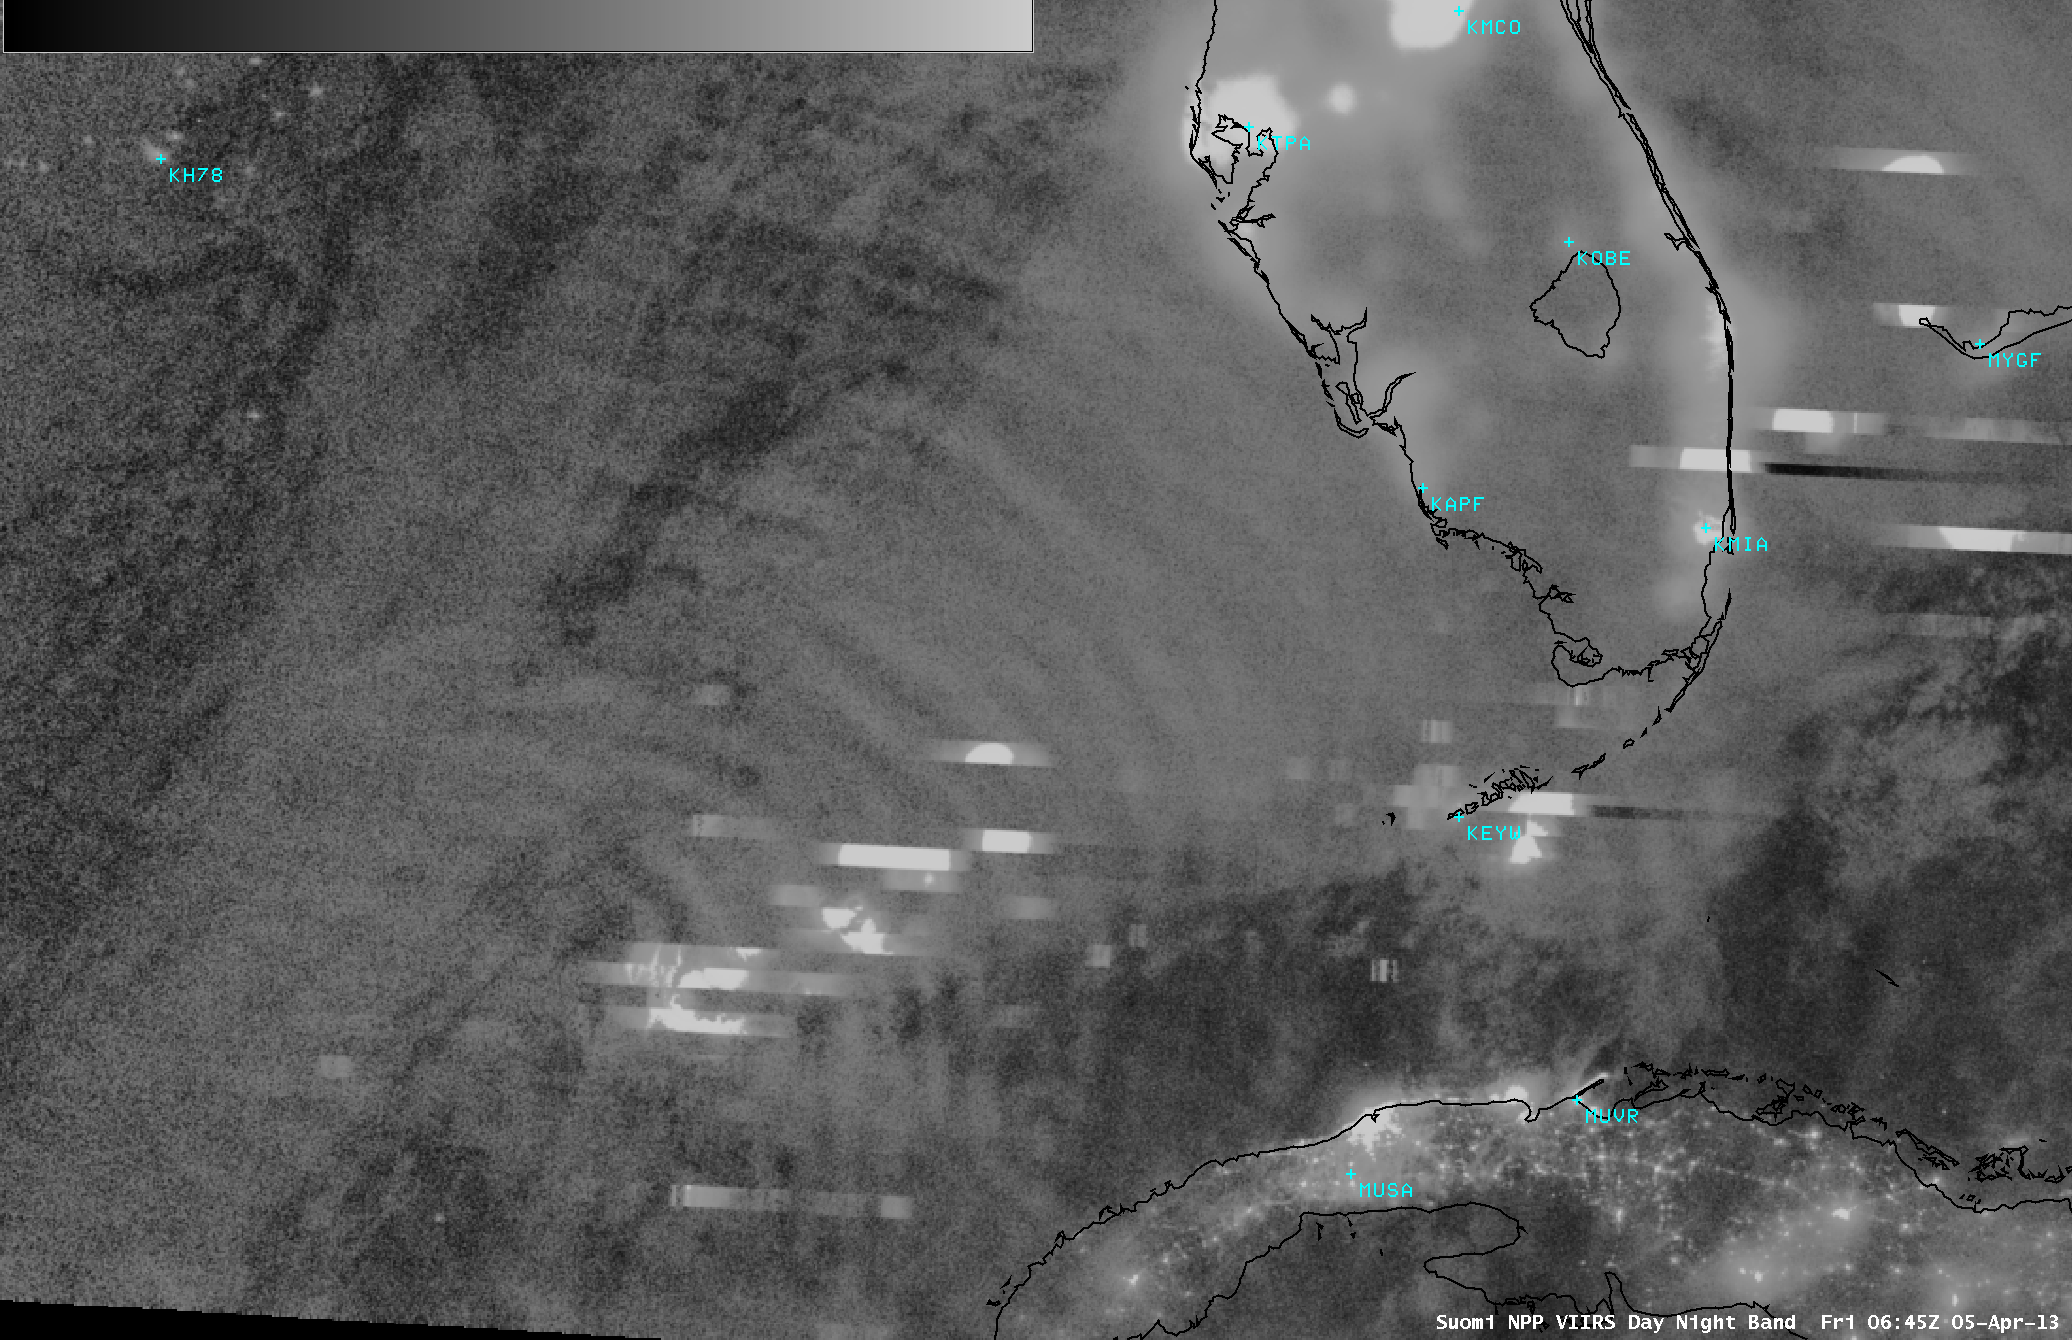 Suomi NPP VIIRS 0.7 Âµm Day/Night Band and 11.45 Âµm IR channel images